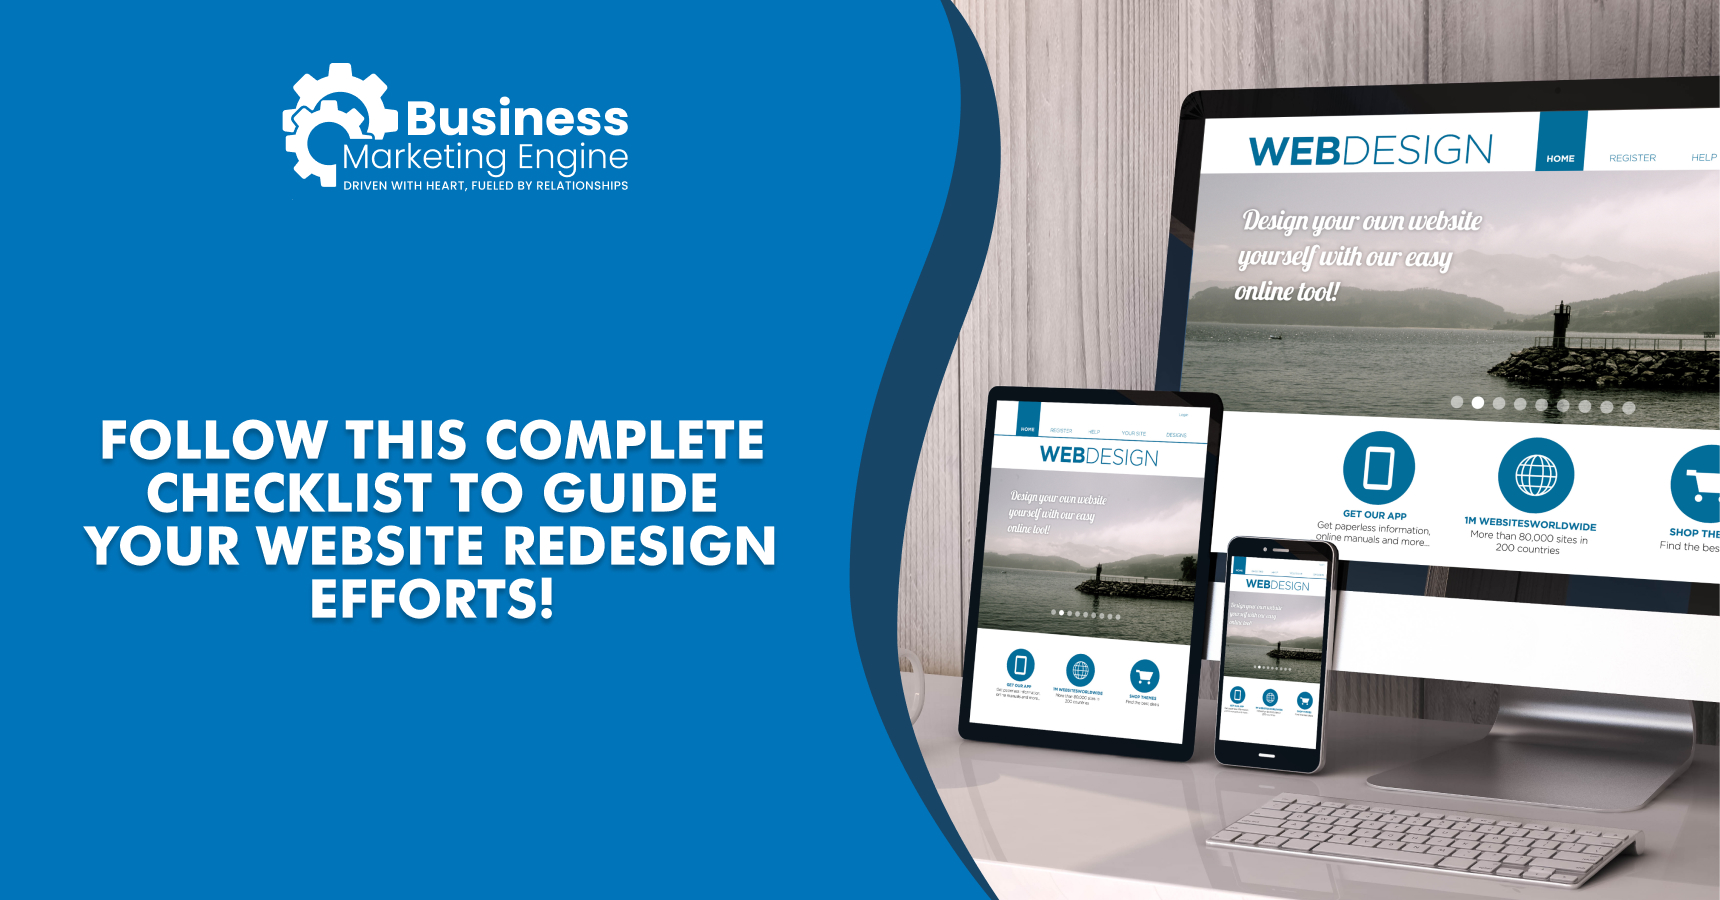 Follow this complete checklist to guide your website redesign efforts